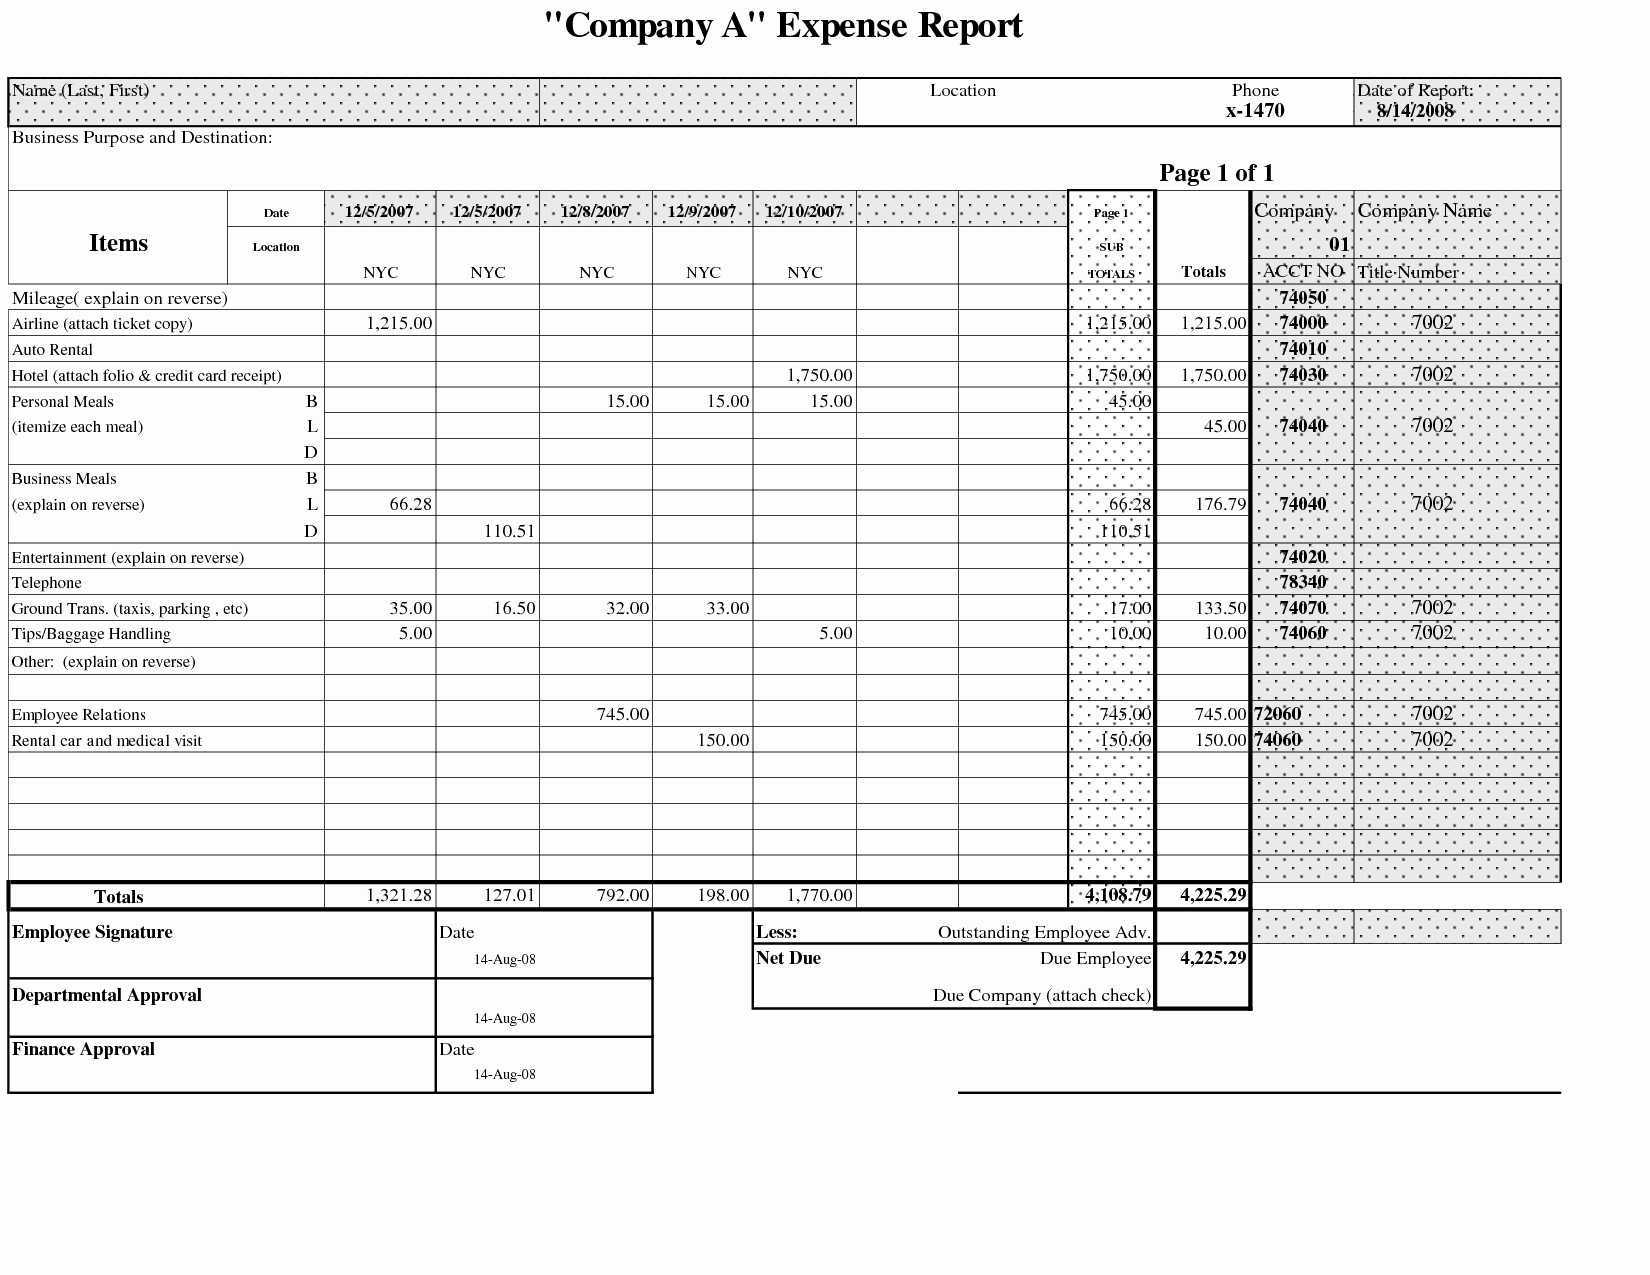 Gas Mileage Expense Report Template – Papele Regarding Gas Mileage Expense Report Template